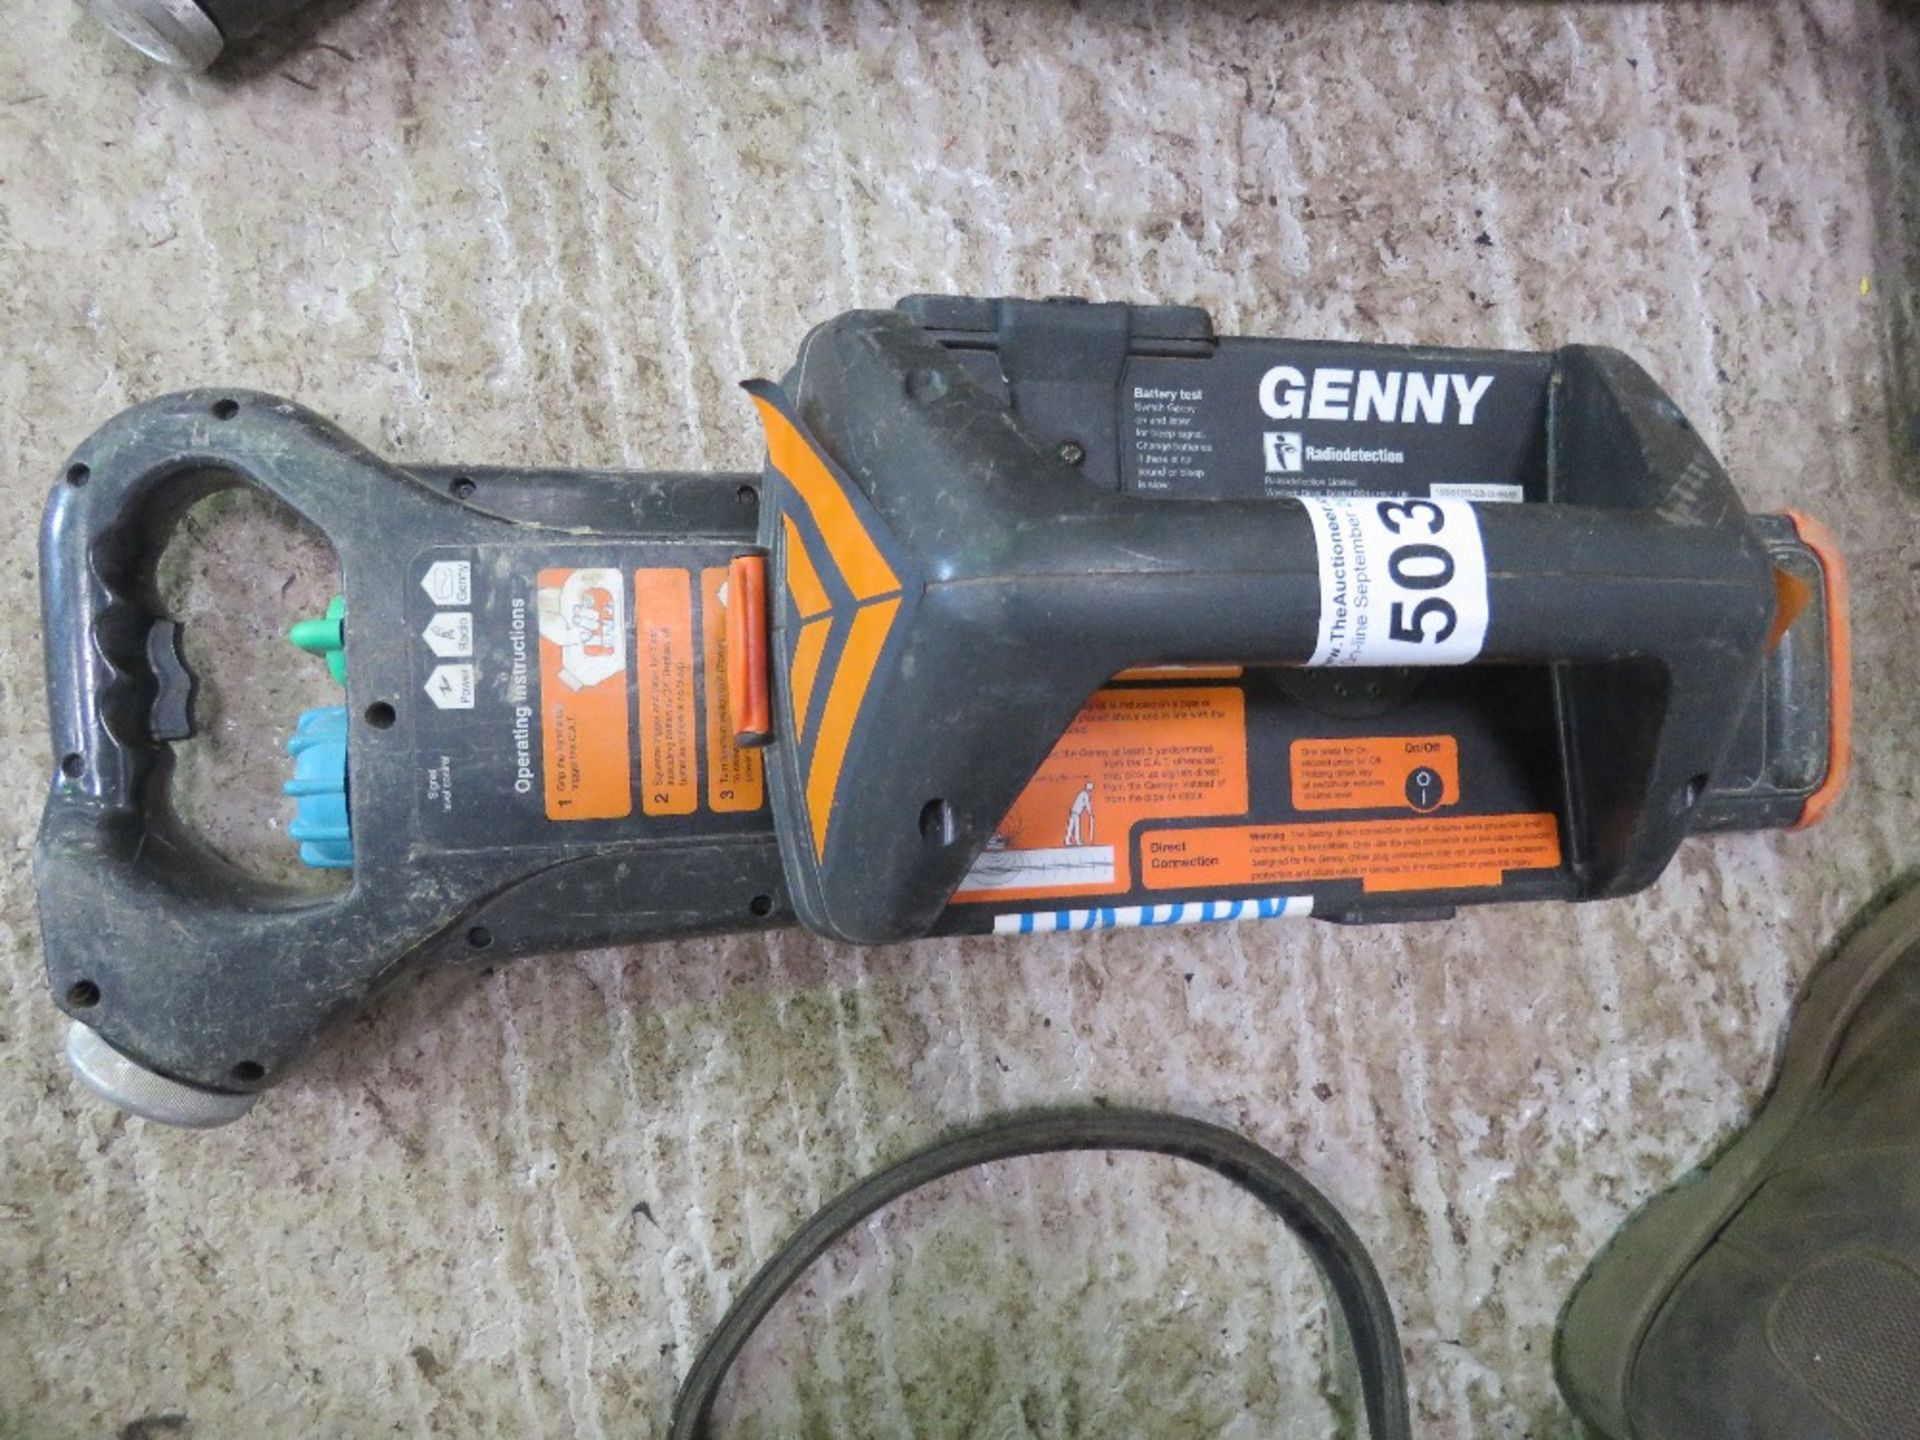 CAT AND GENNY CABLE DETECTOR SET. - Image 2 of 2